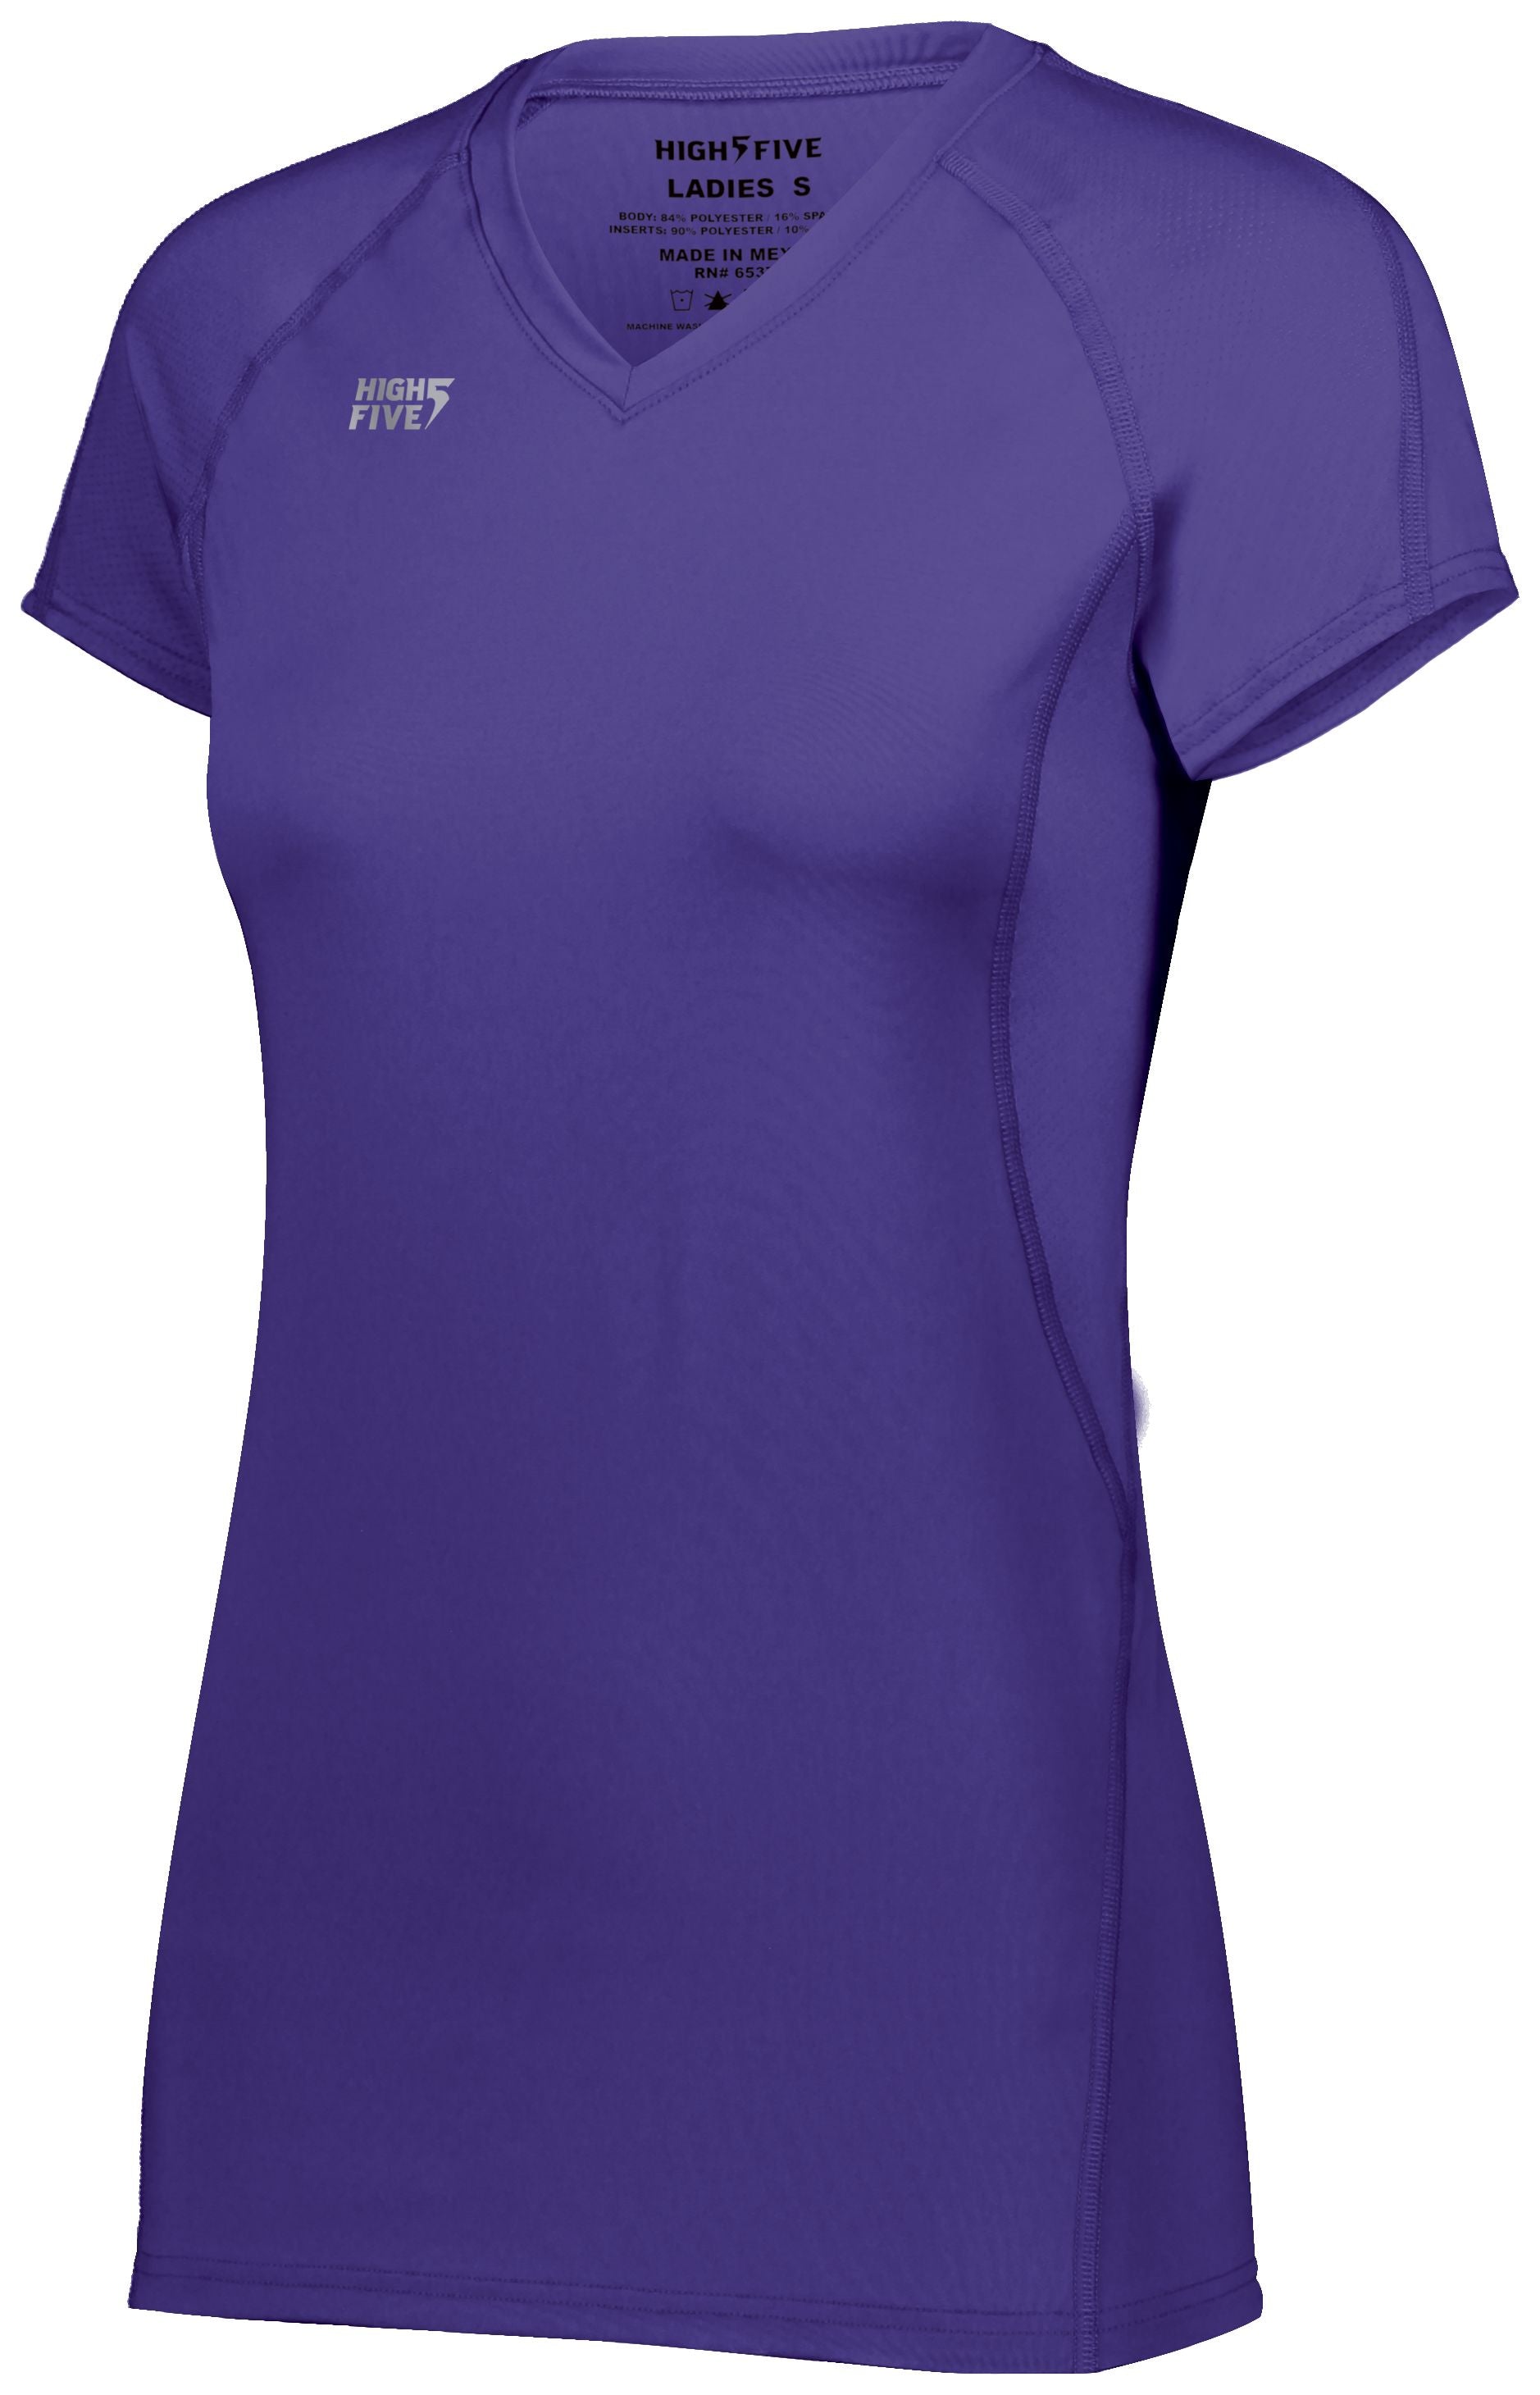 High 5 Ladies Truhit Short Sleeve Jersey in Purple (Hlw)  -Part of the Ladies, Ladies-Jersey, High5-Products, Volleyball, Shirts product lines at KanaleyCreations.com